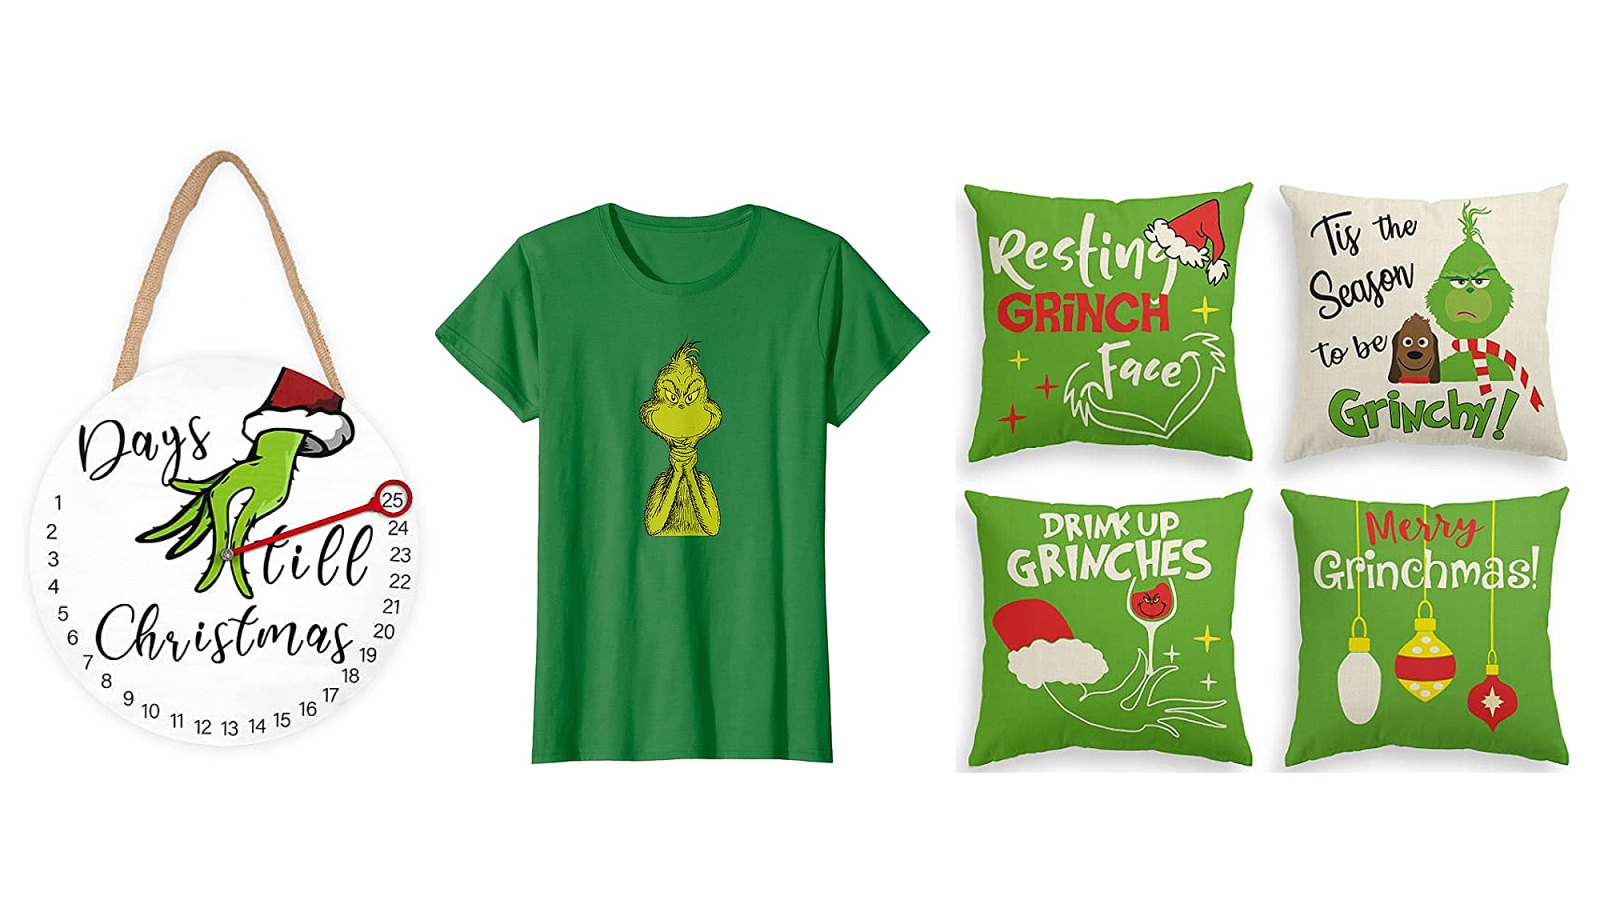 Grinch-Christmas-Items